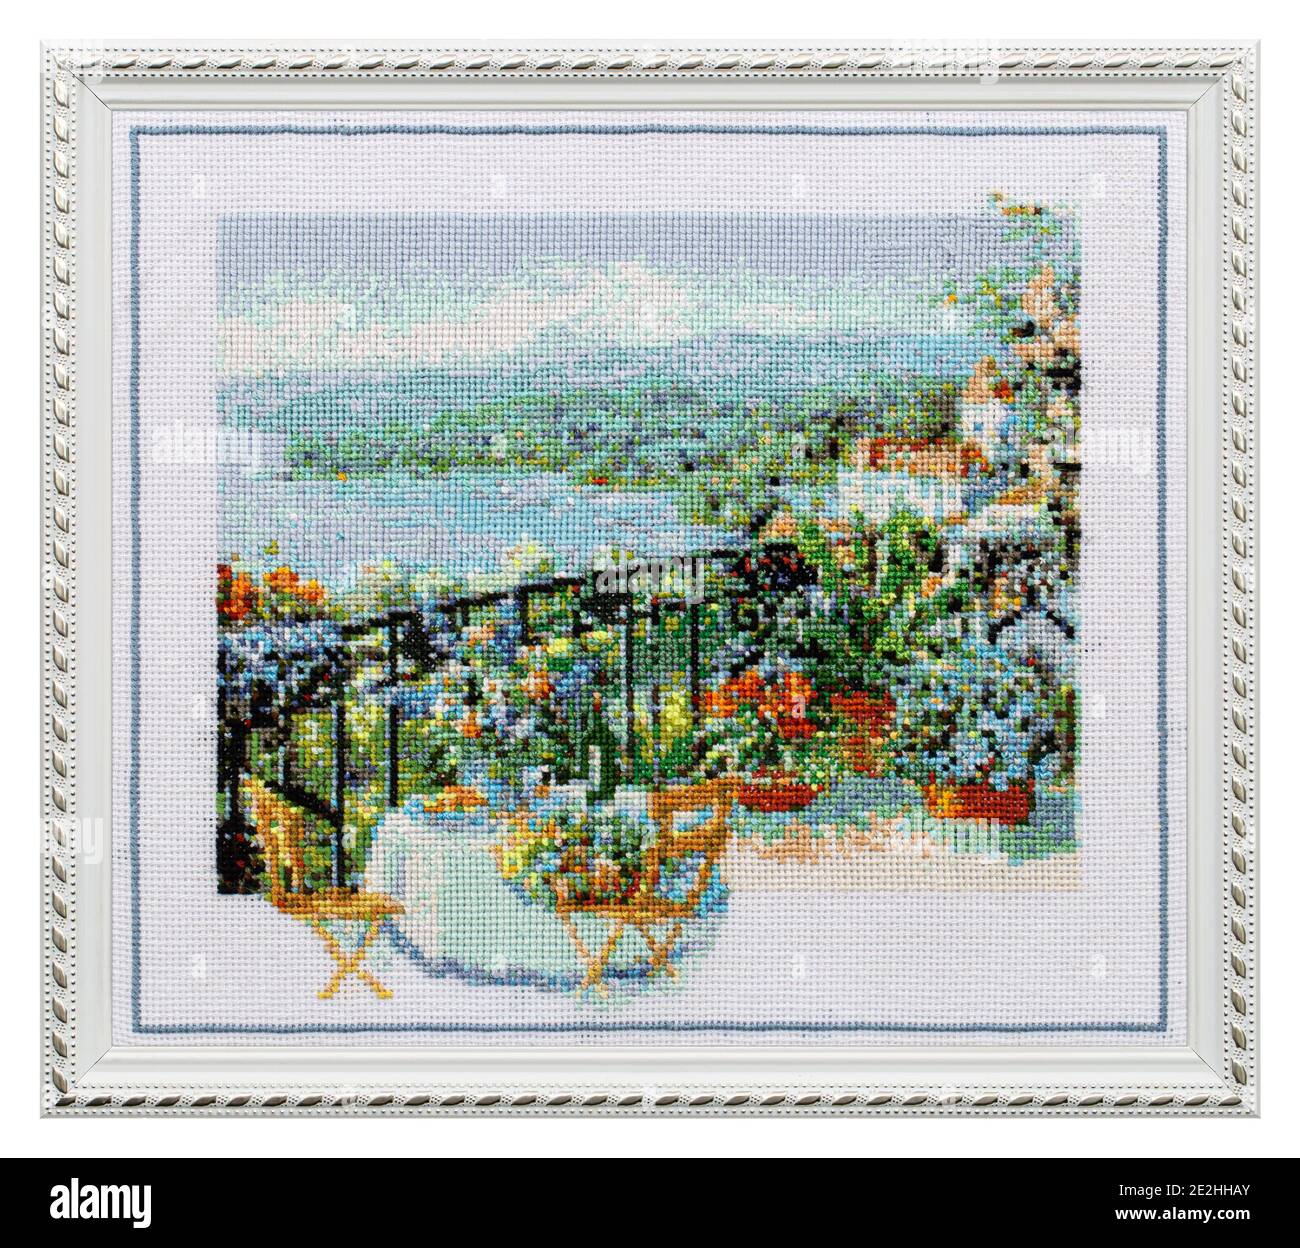 Embroidered picture in an openwork frame, outdoor cafe terrace overlooking the sea, cross-stitch on textile canvas, isolated on white background Stock Photo